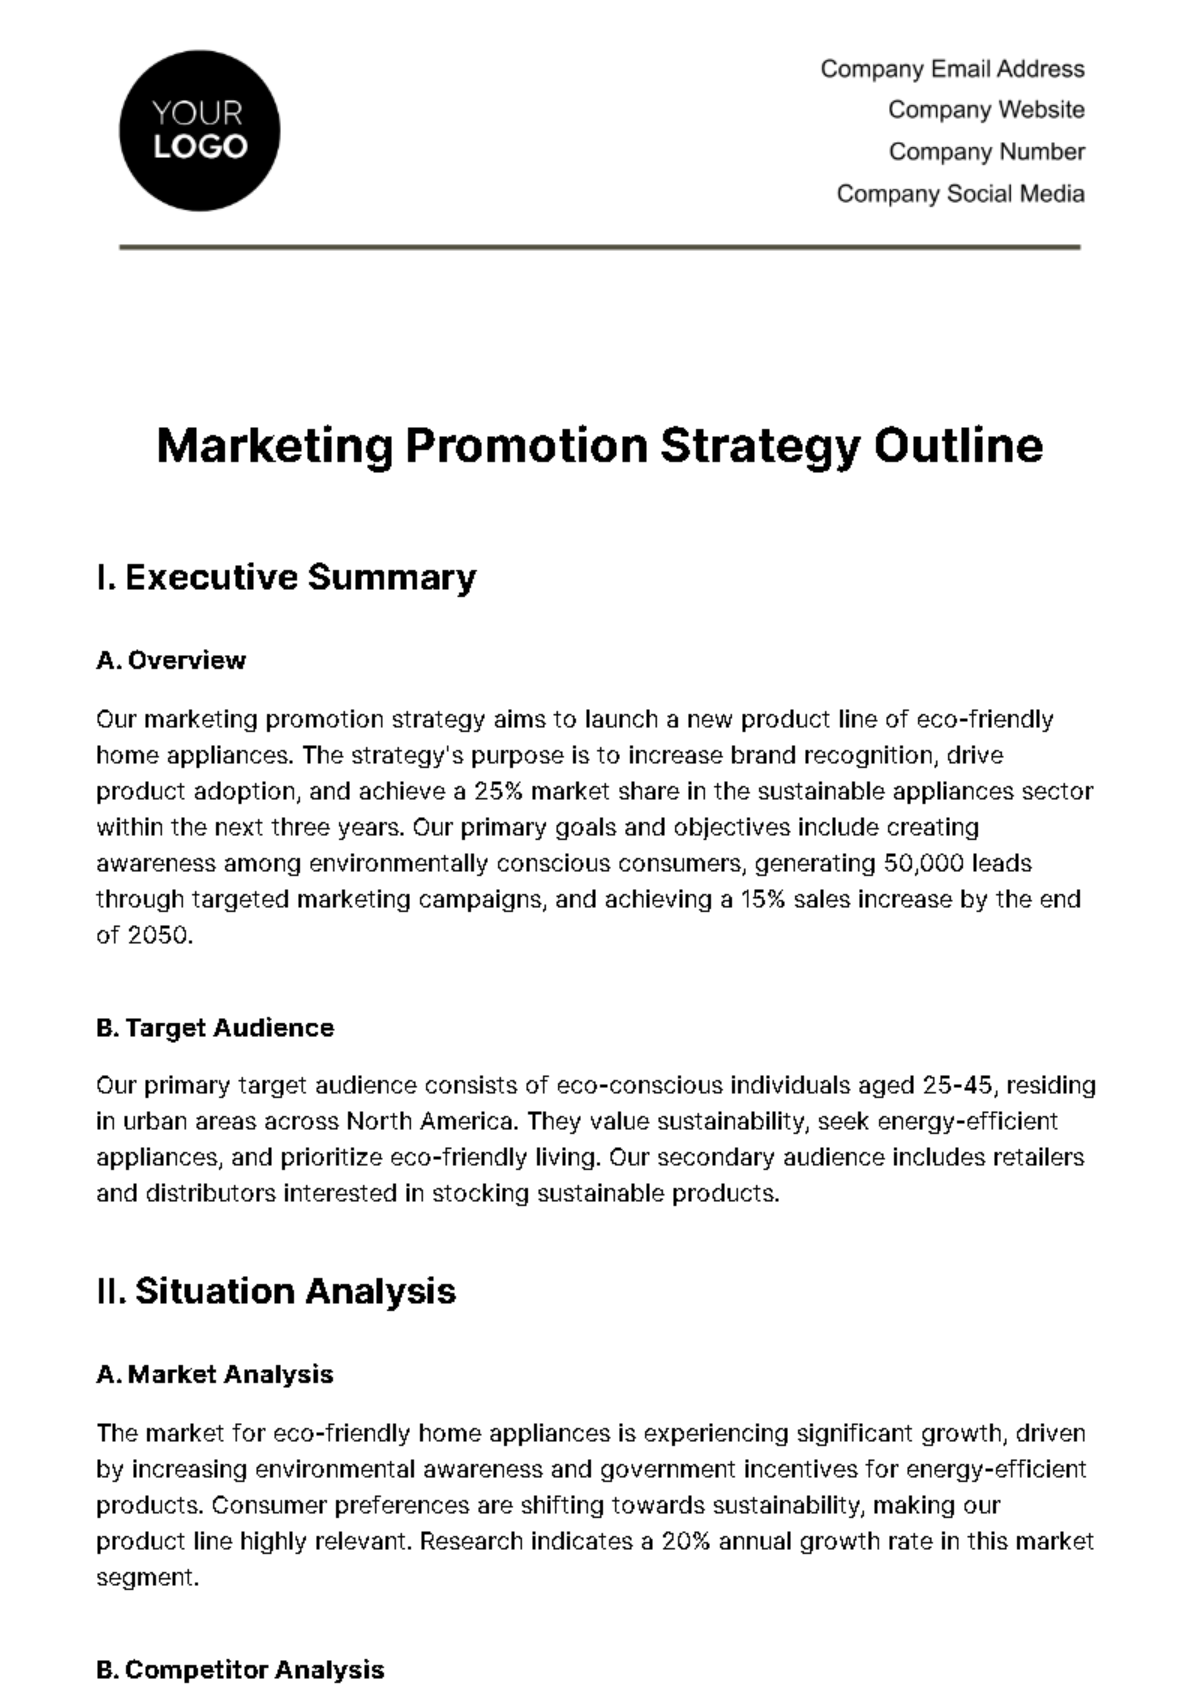 Free Marketing Promotion Strategy Outline Template